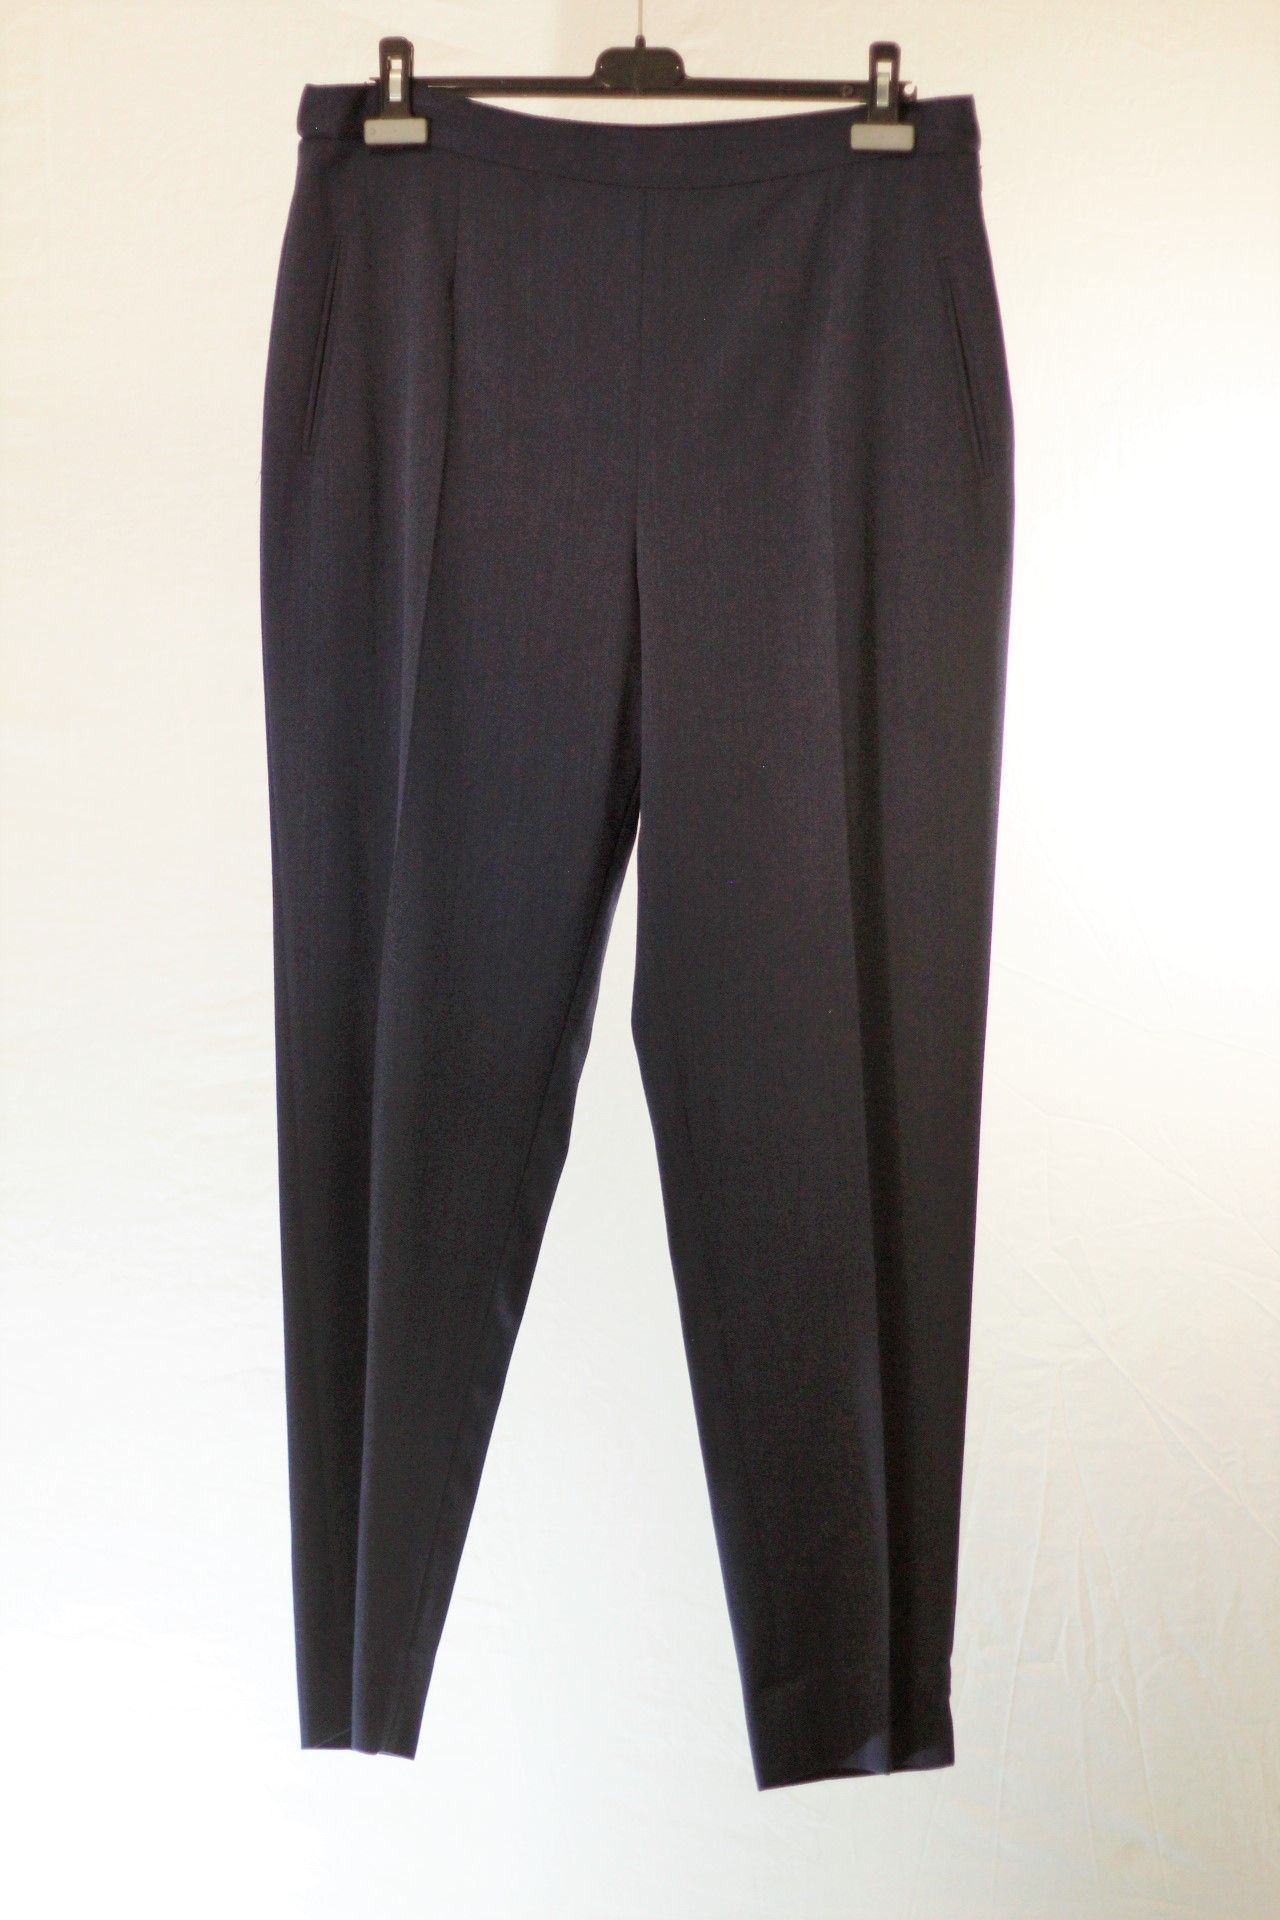 1 x Belvest Navy Trousers - Size: 26 - Material: Wool/ Cotton - From a High End Clothing Boutique In - Image 6 of 9